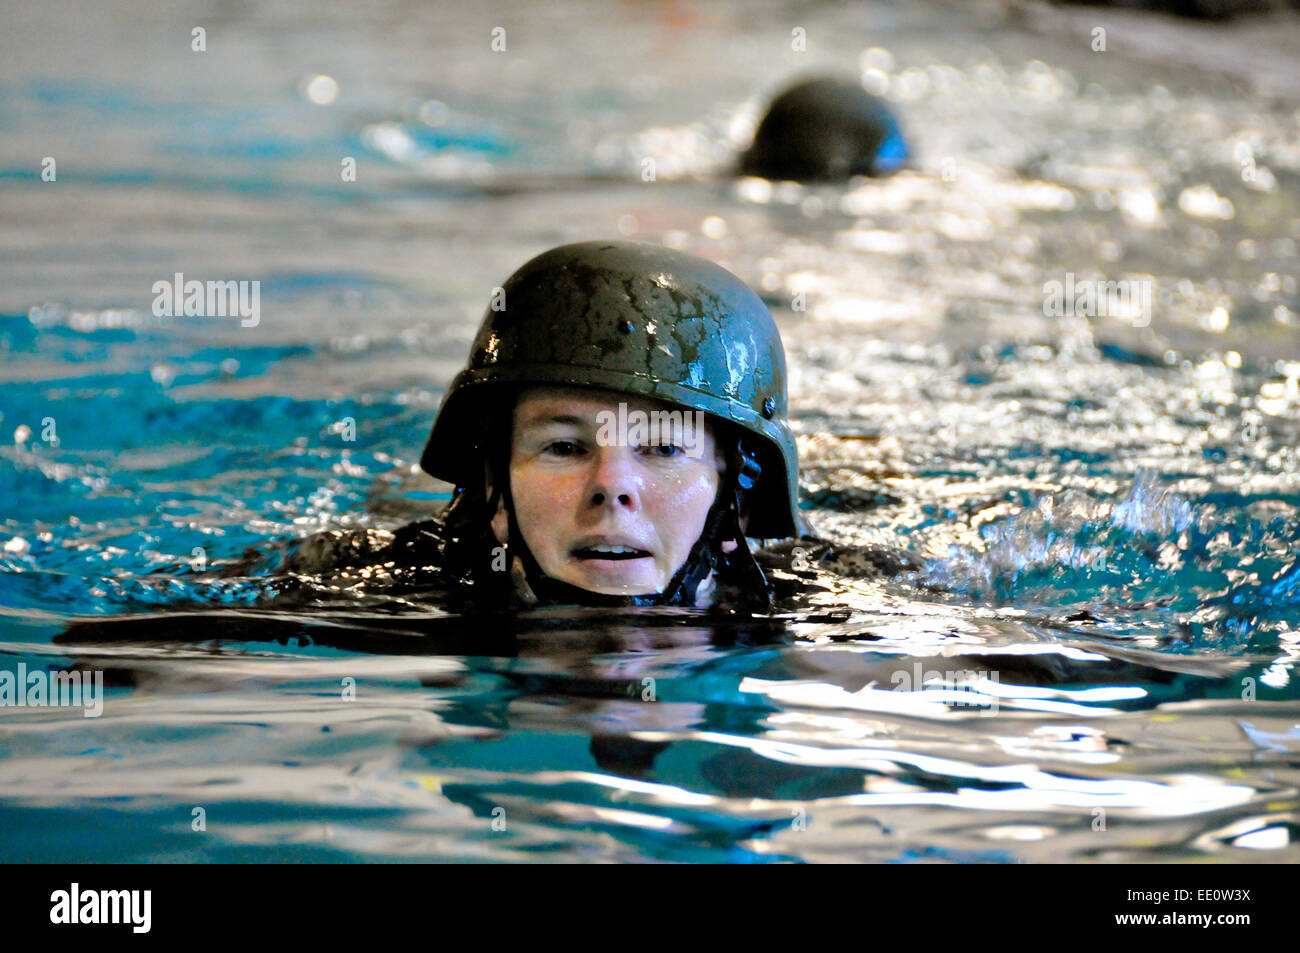 US Army Officer Candidate Wendy McDougall swims wearing full combat uniform and helmet during water survival training January 10, 2015 in Rehoboth Beach, Delaware. Stock Photo